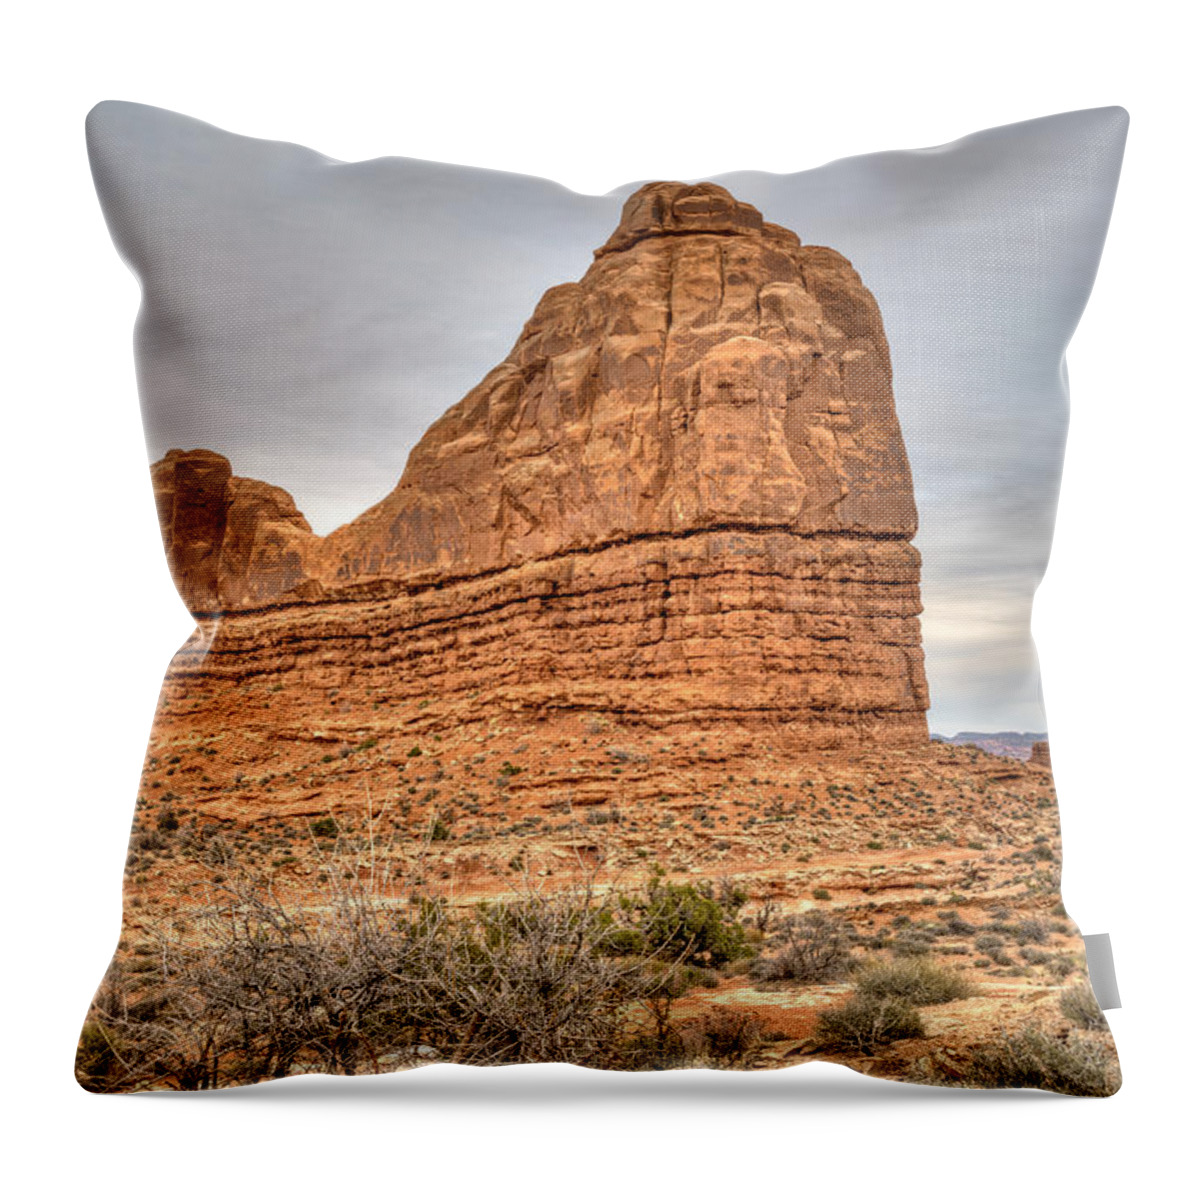 Landscape Throw Pillow featuring the photograph Rock Formation by Brett Engle